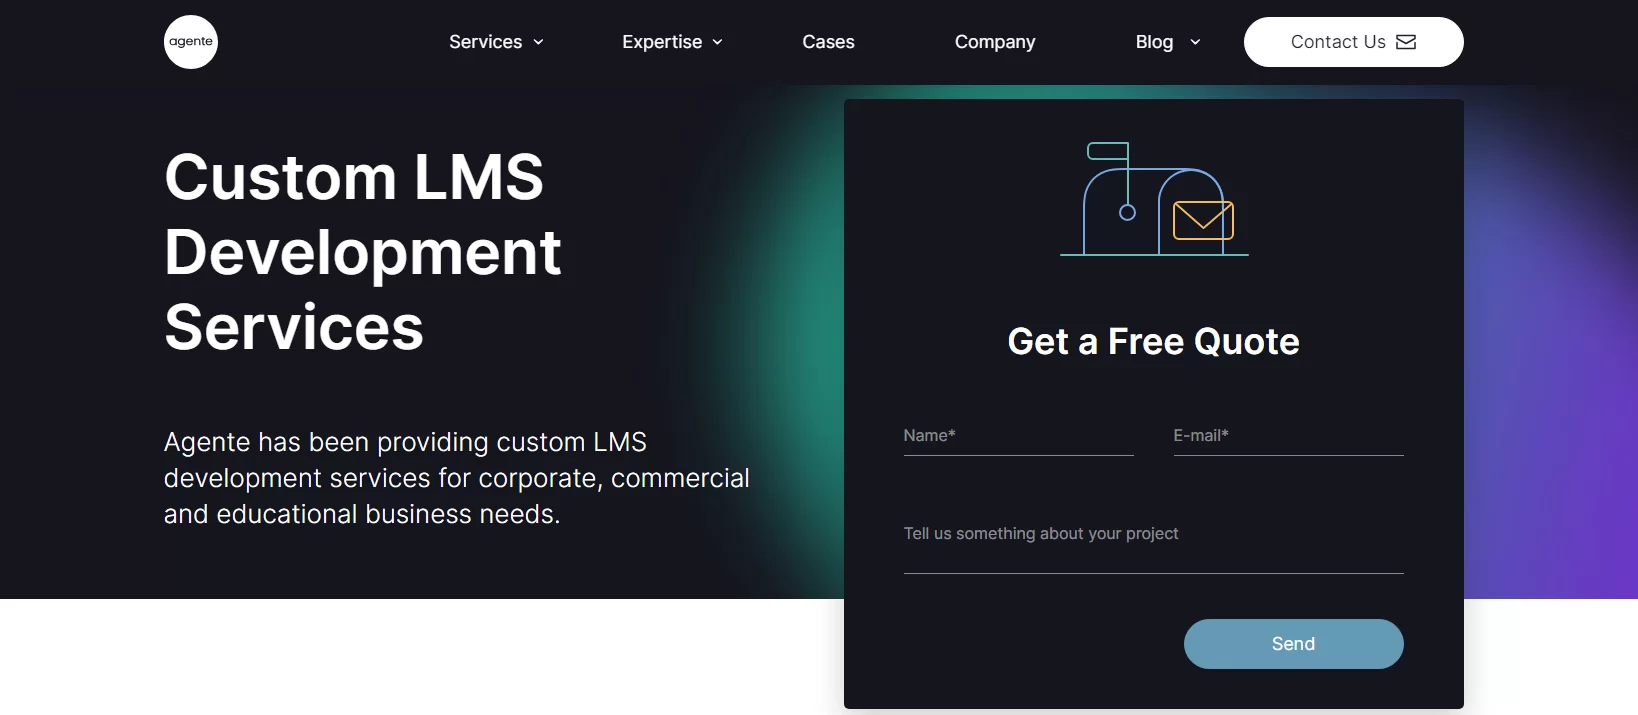 Why Hire Agente Learning Management System (LMS) Service Providers